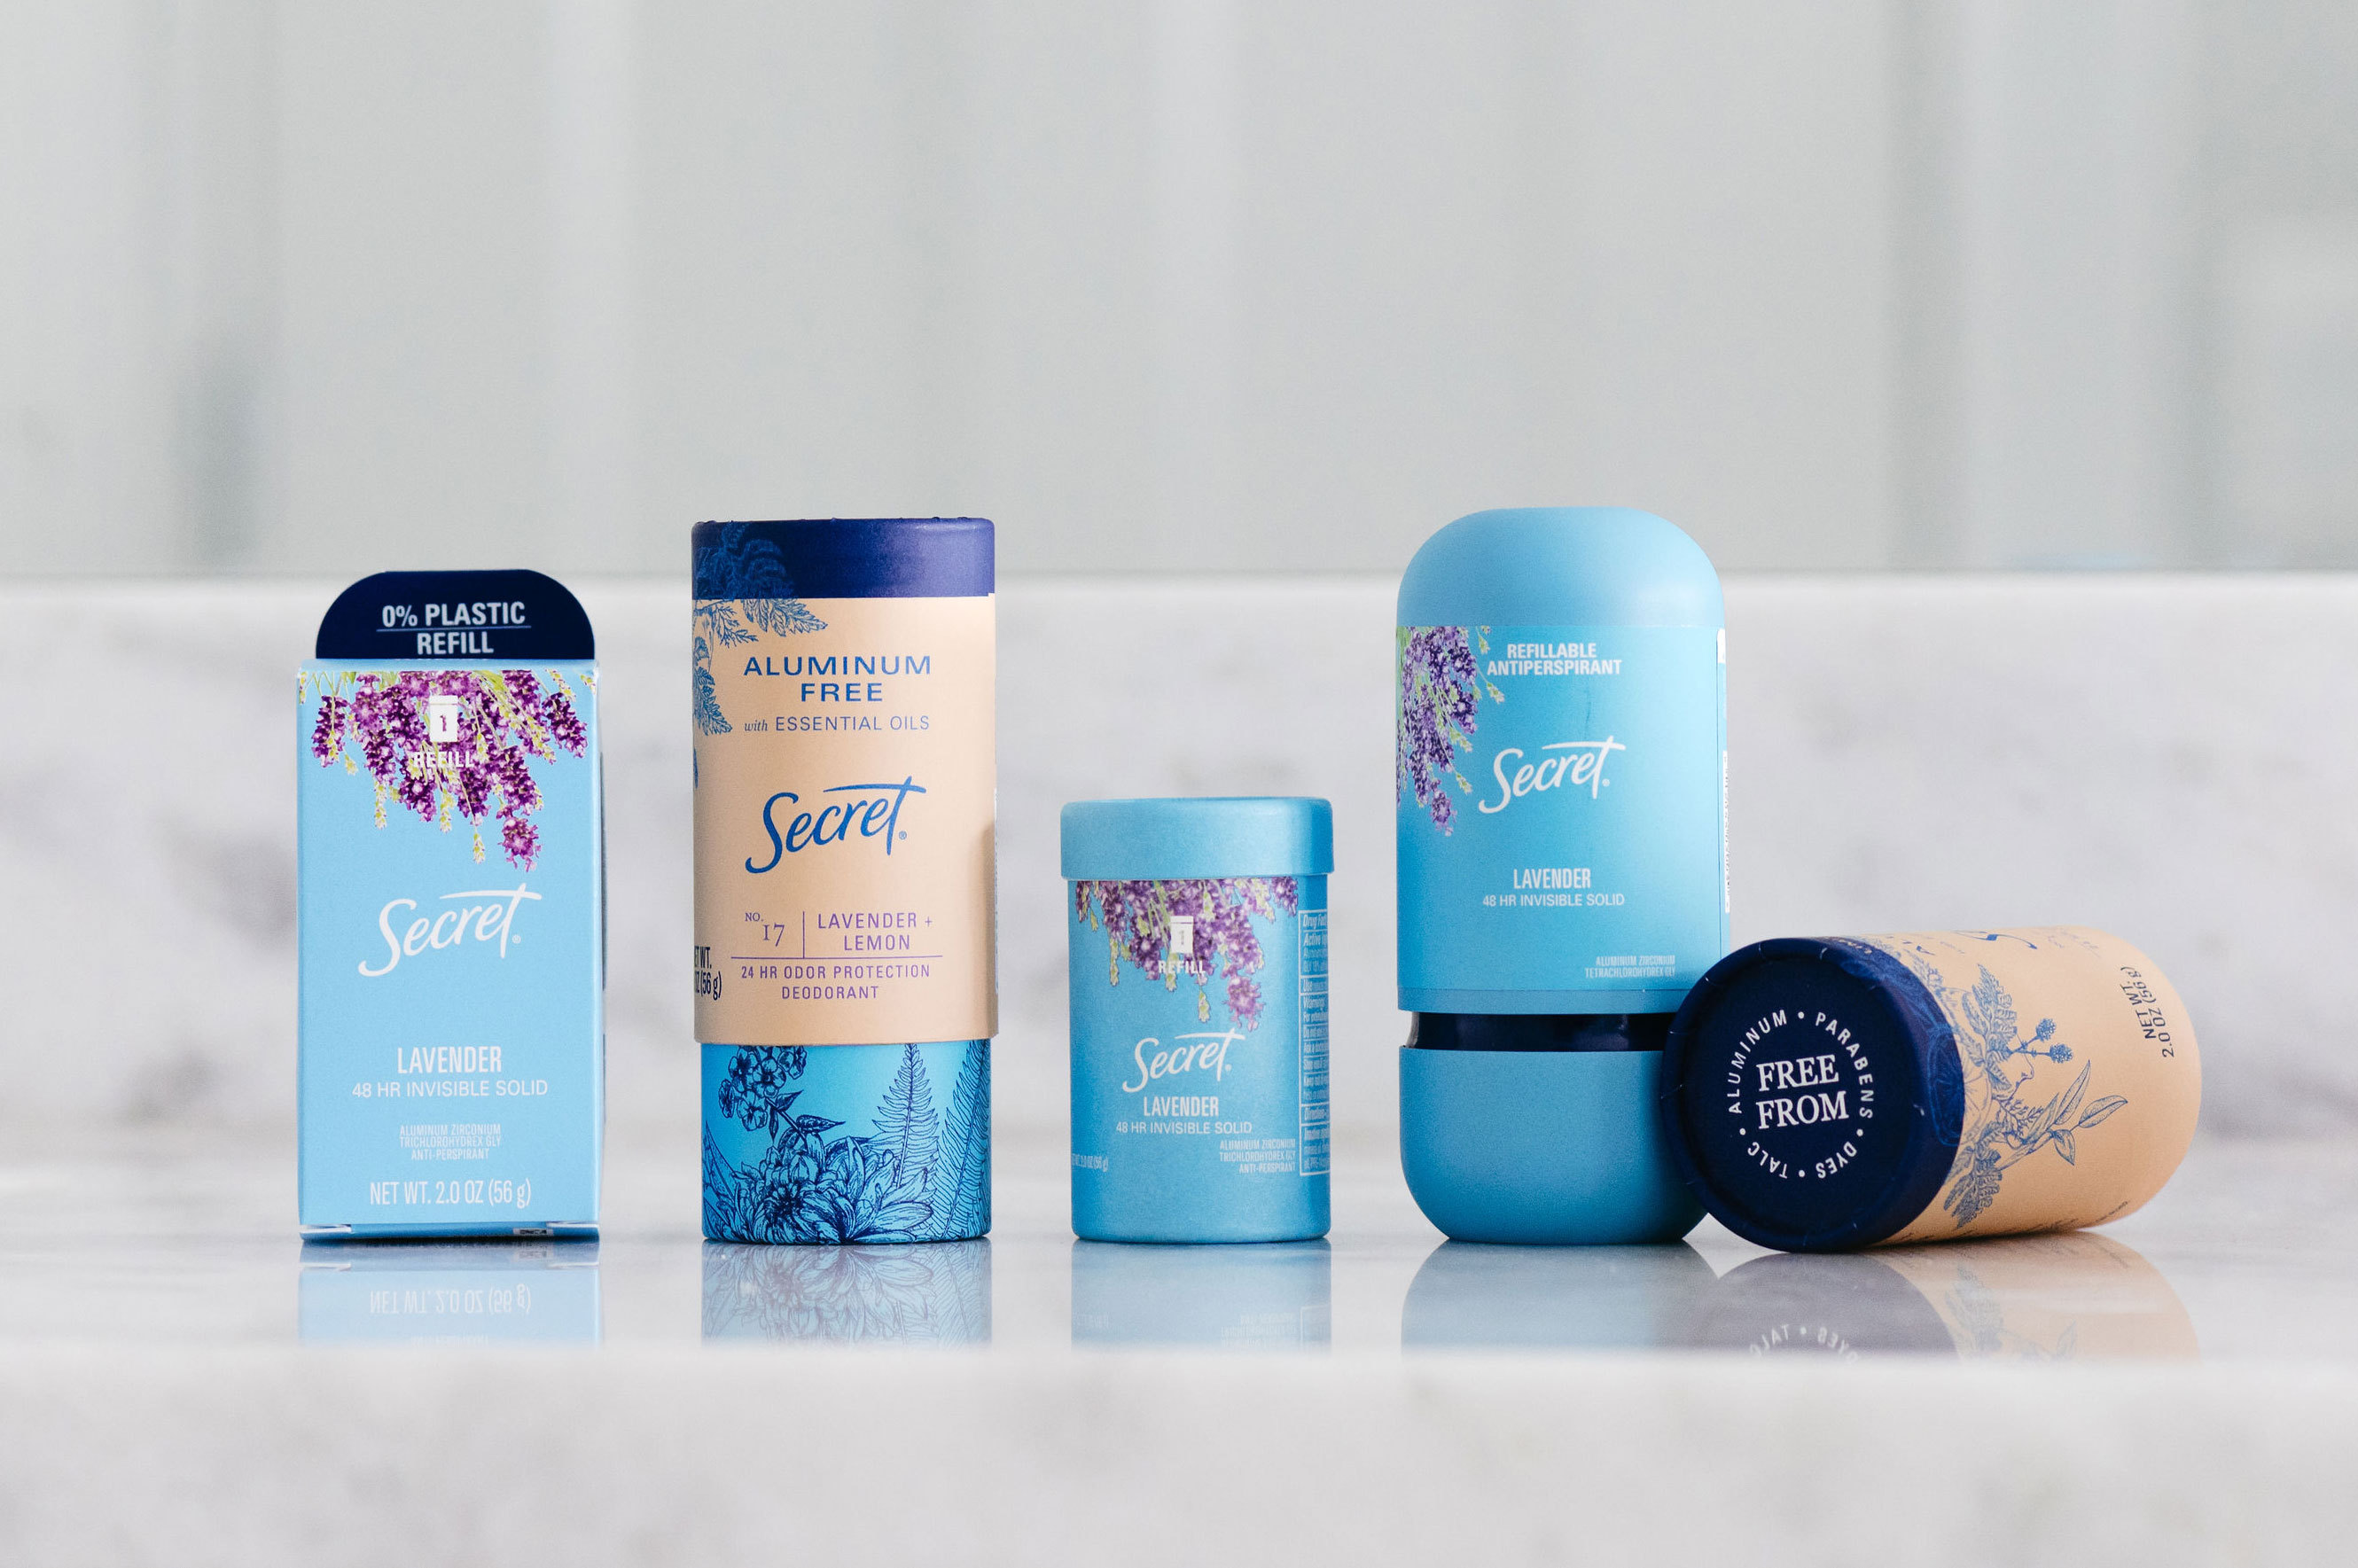 Skraldespand Disse Skrive ud Old Spice & Secret Are First Large Brands to Launch Refillable  Antiperspirant Cases Made With No Single-Use Plastic Packaging | Business  Wire